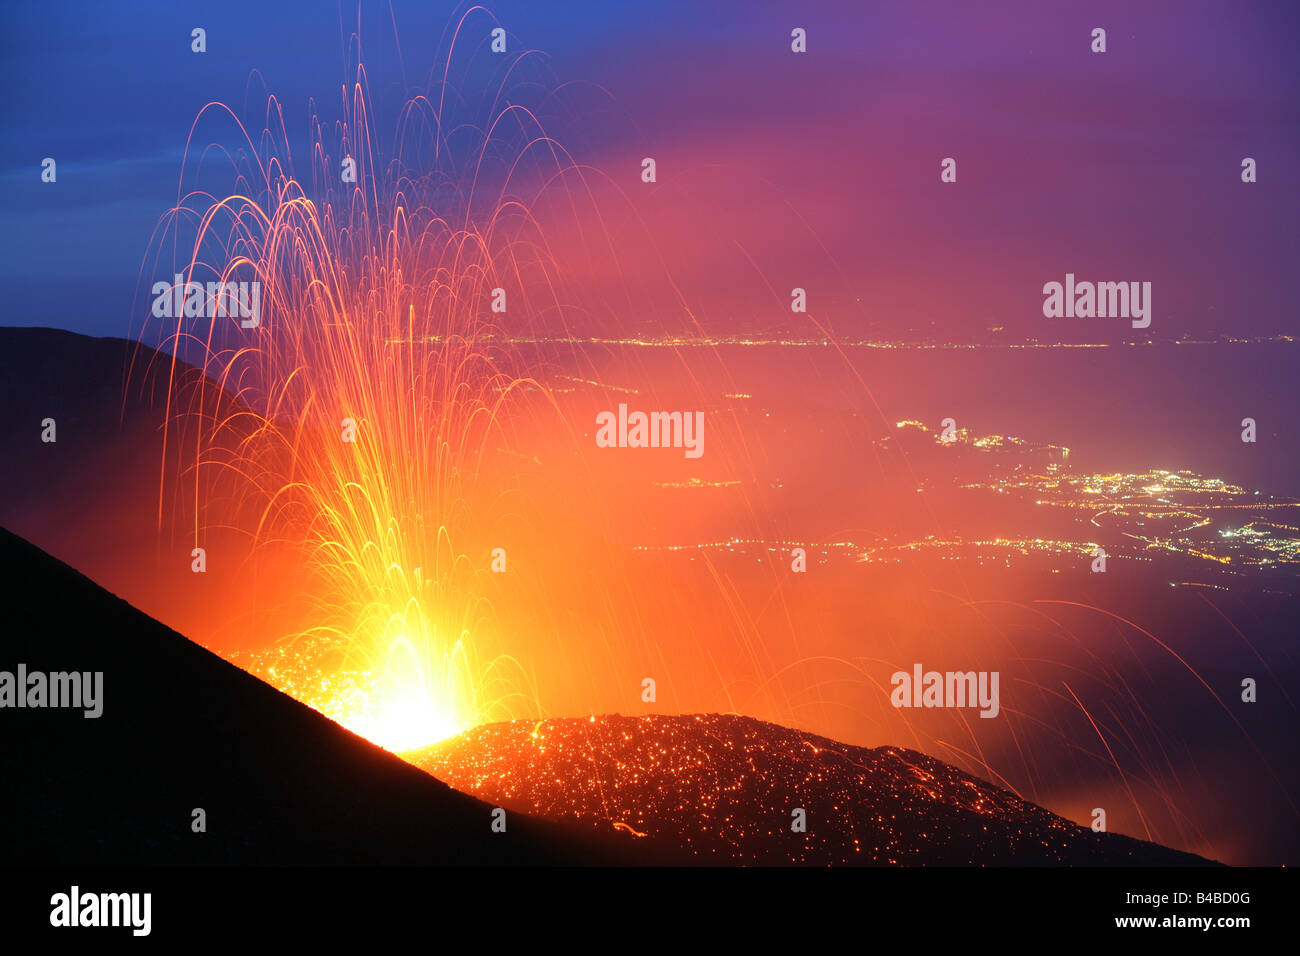 Volcanic eruption from Mt. Etna volcano, Sicily, in the evening with lights of Taormina and Giarre in the background Stock Photo